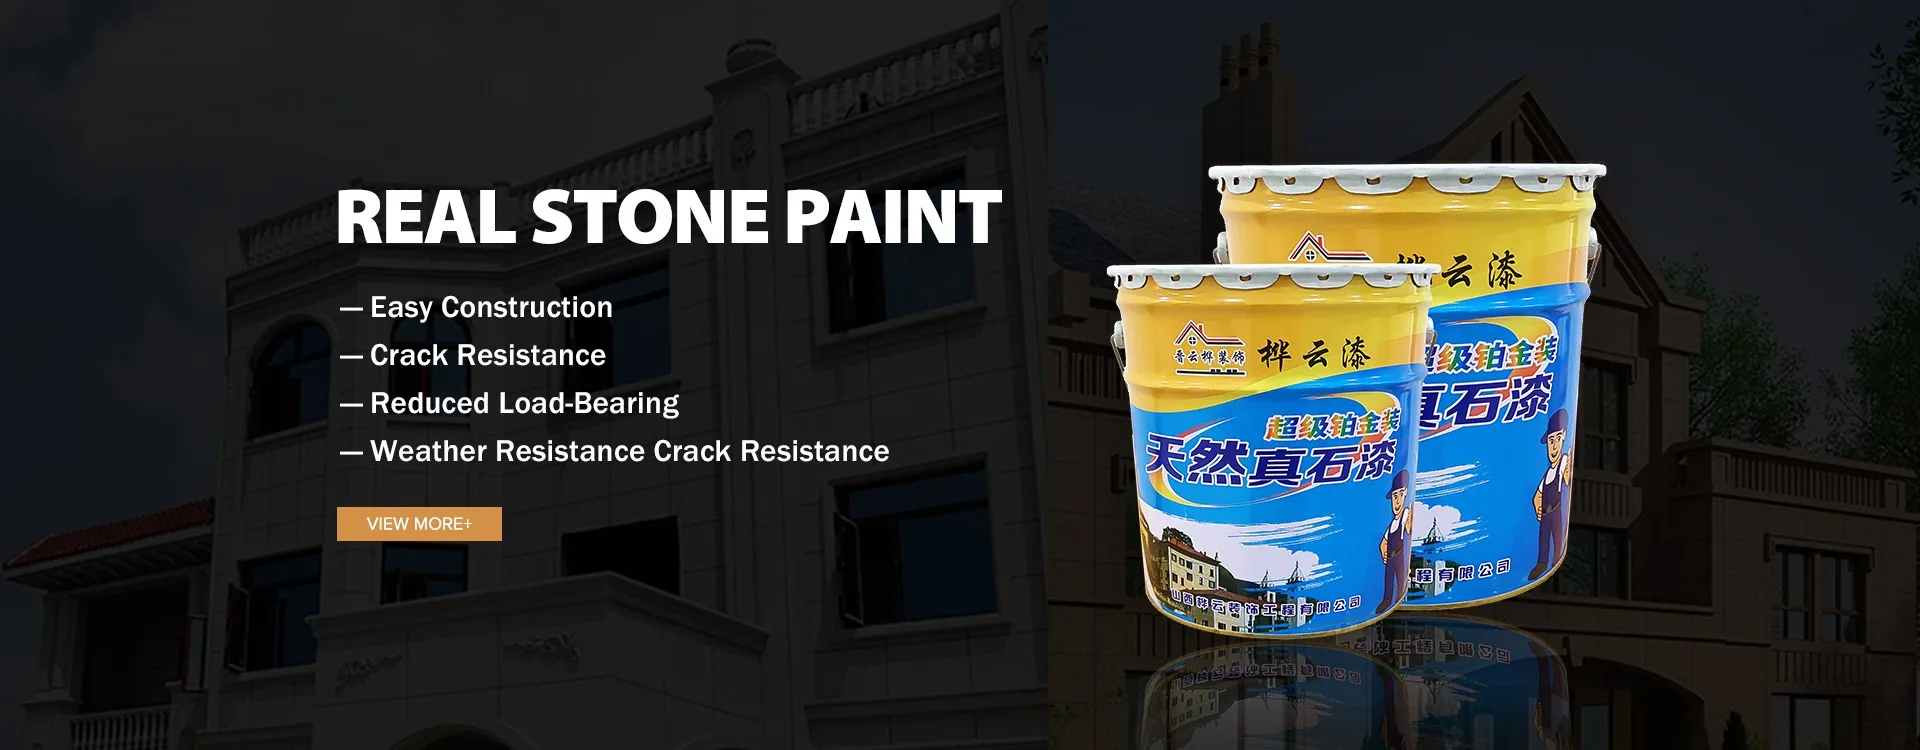 real stone paint